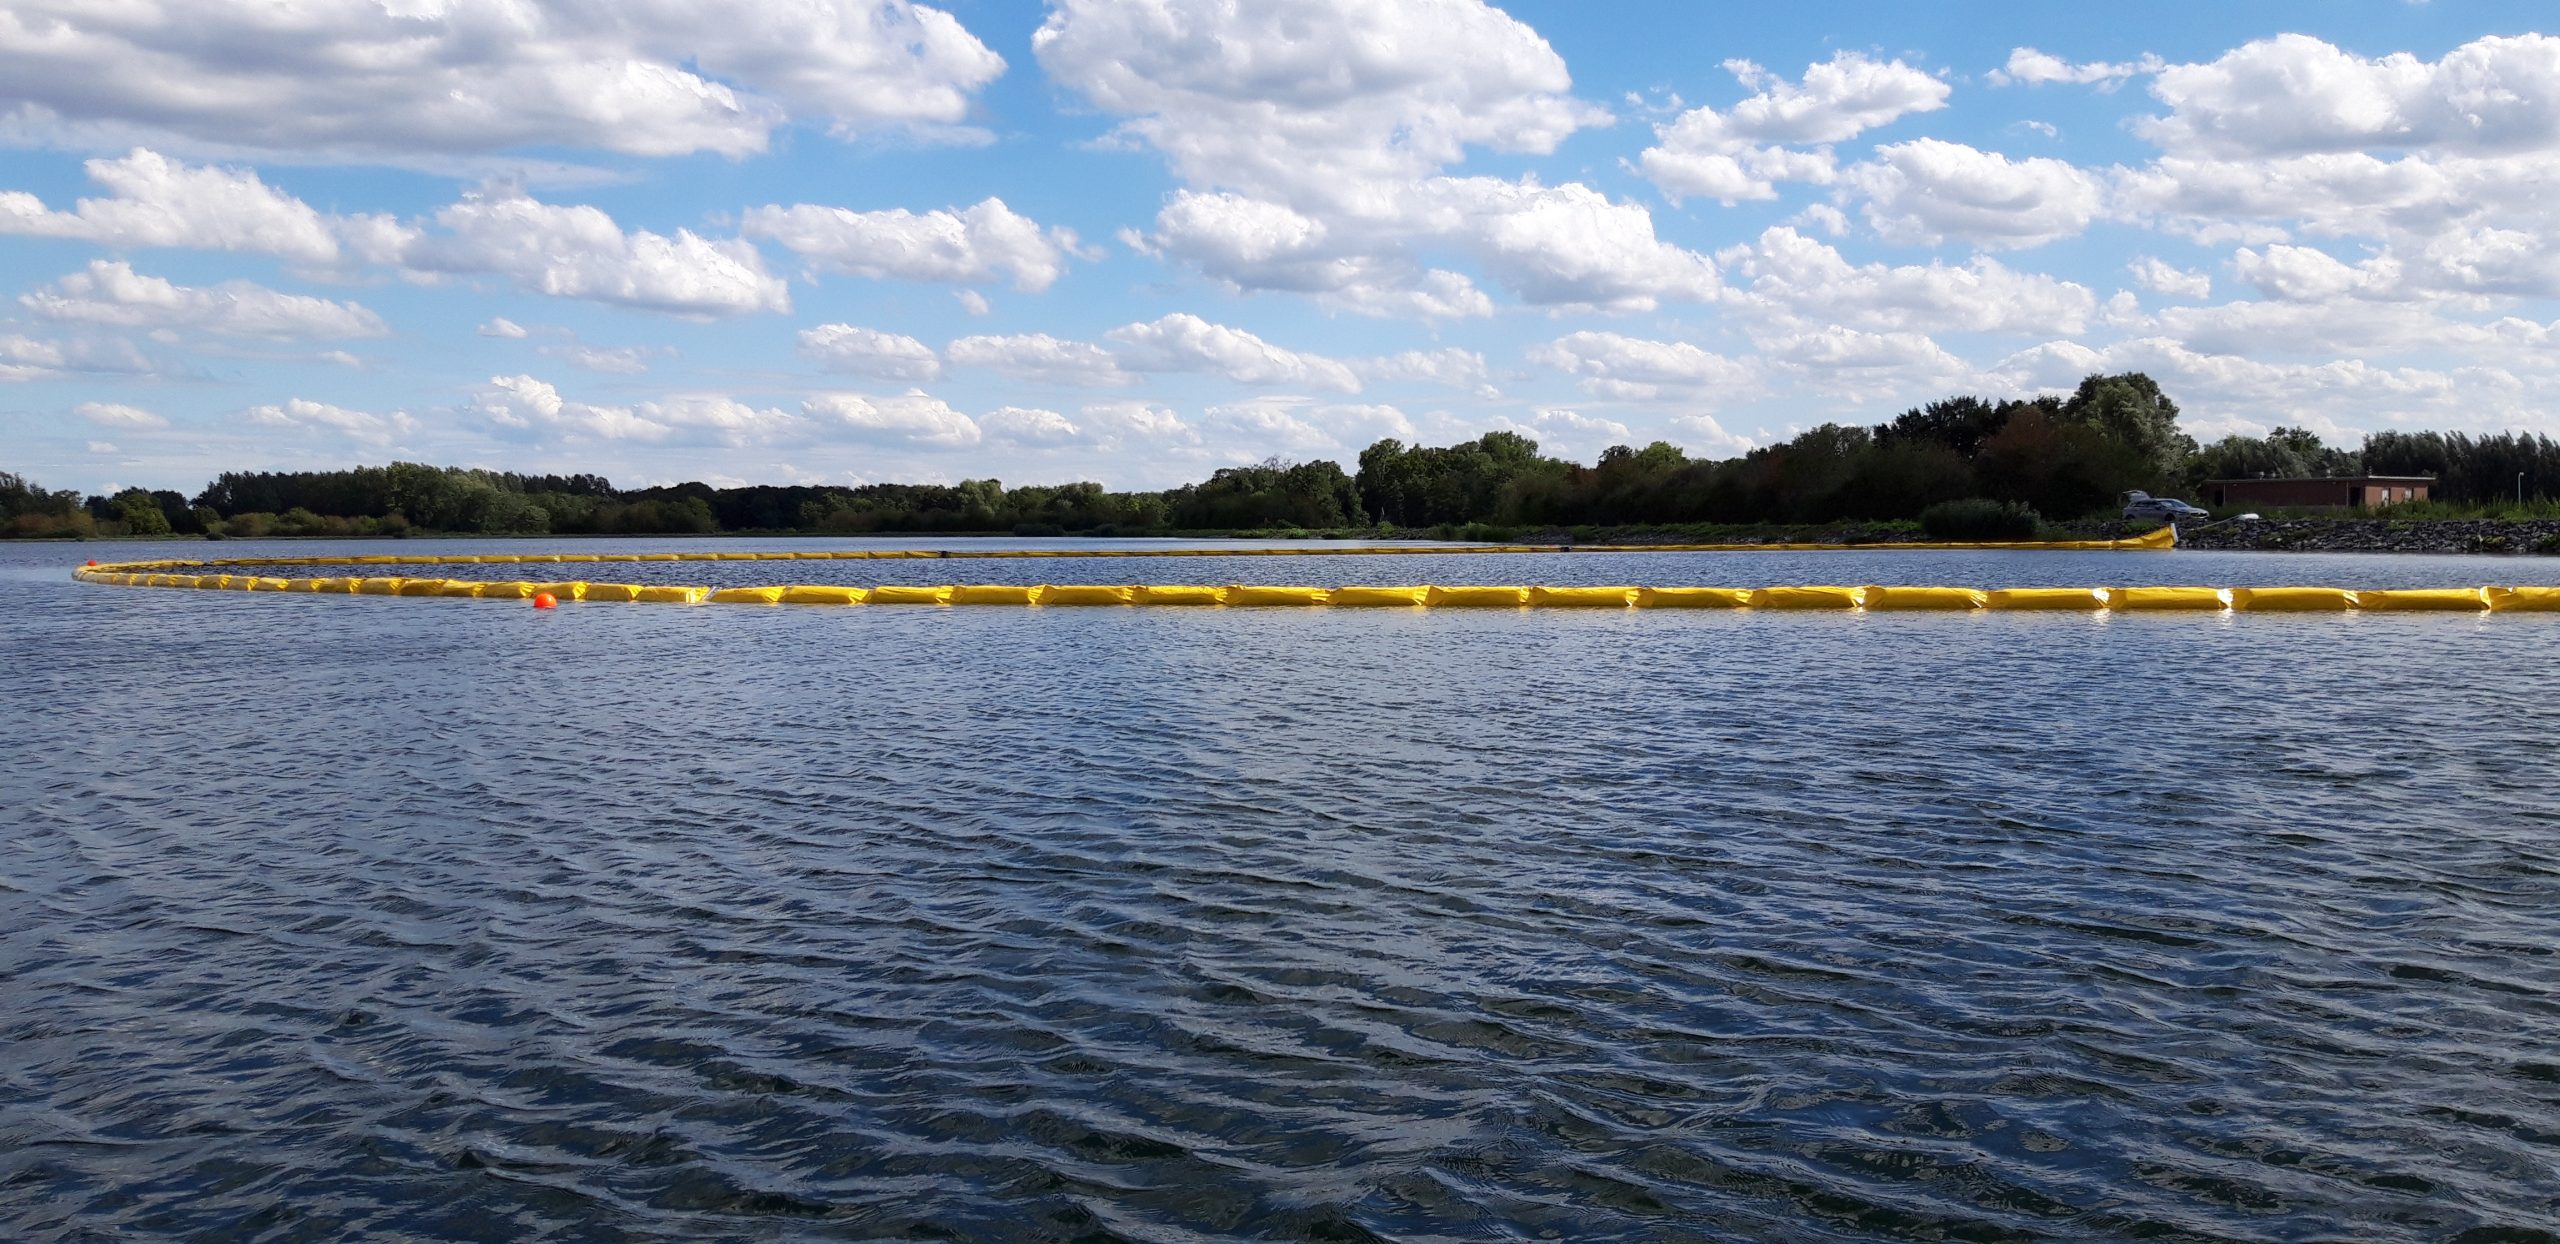 Breaking Boundaries: How Ecocoast is tackling the spread of lethal algae blooms